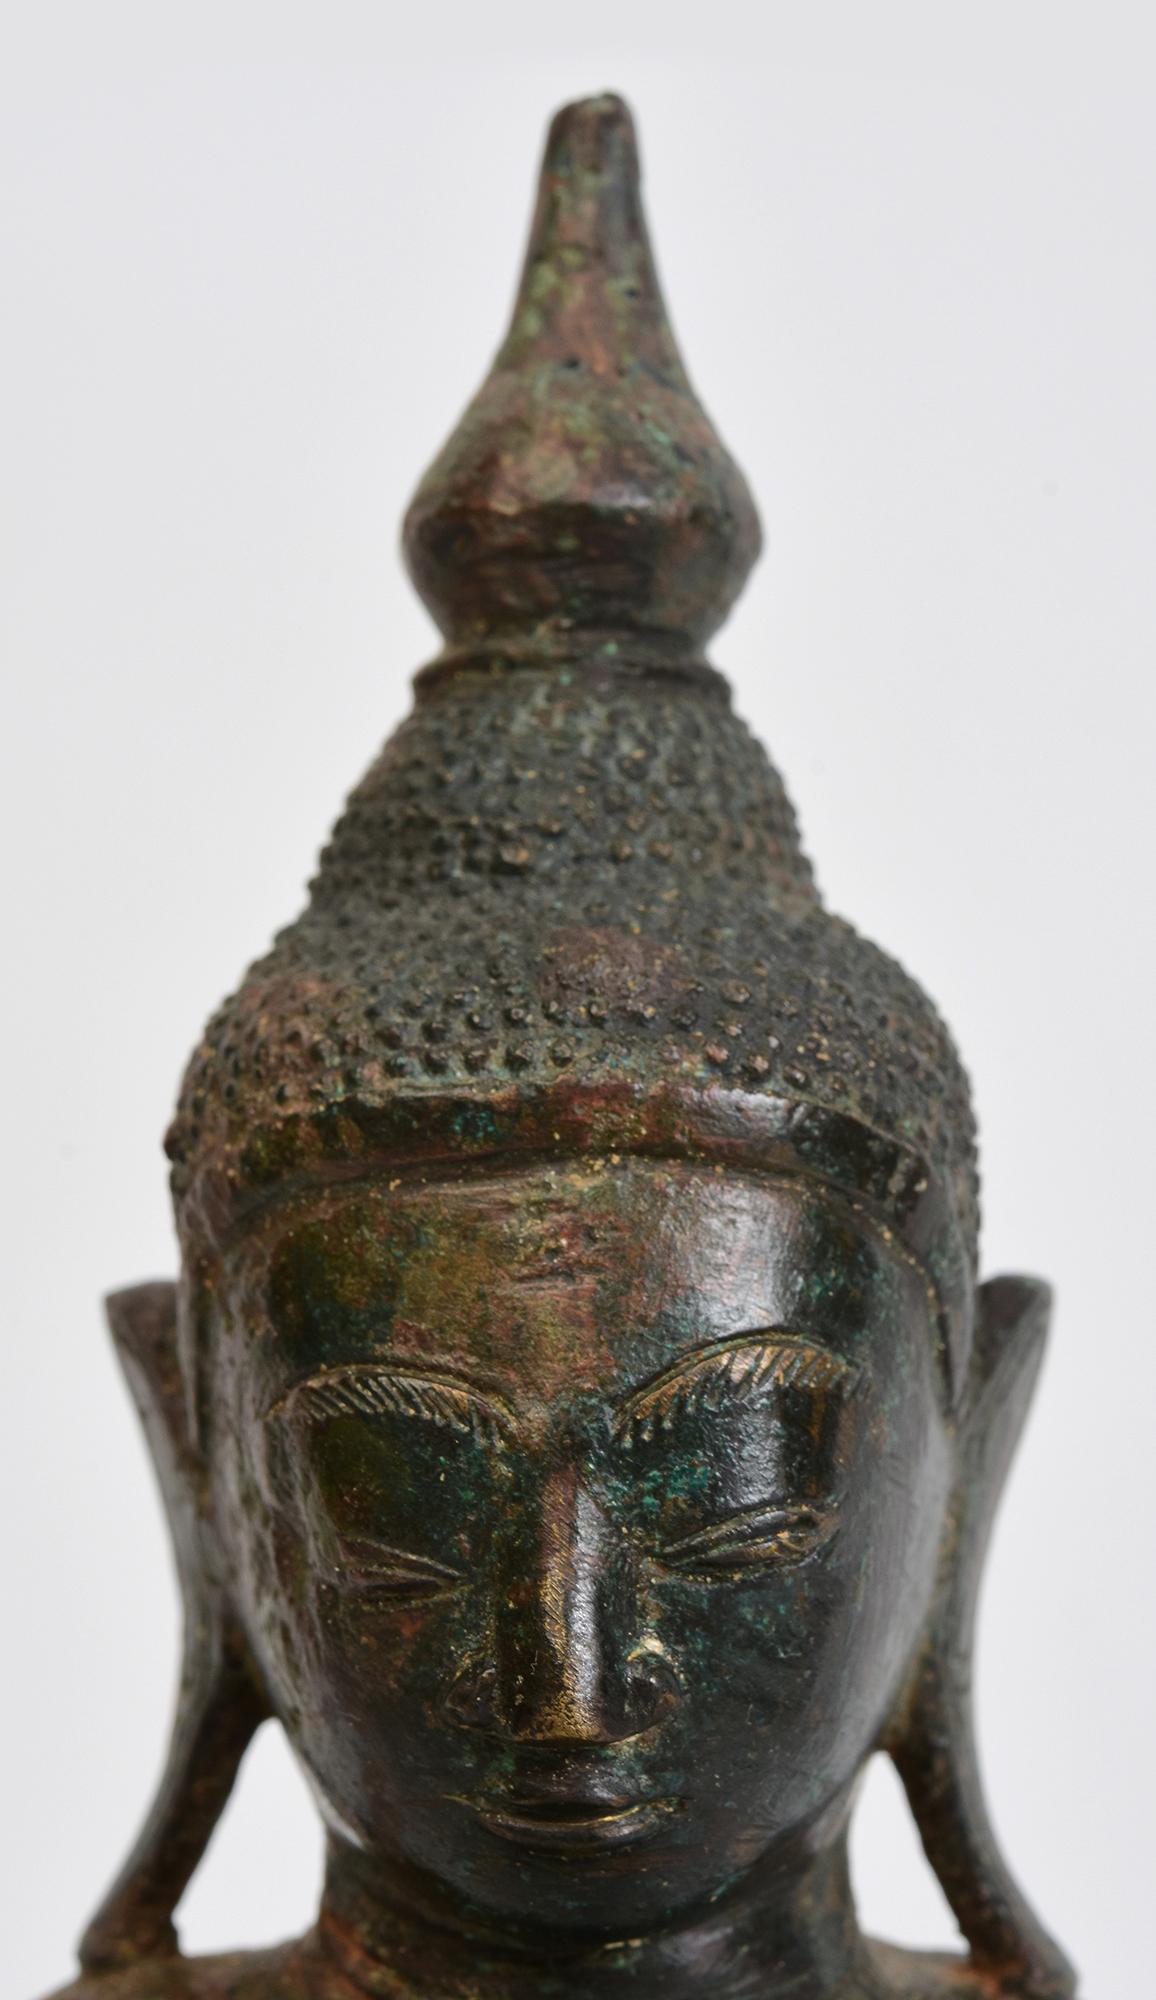 Antique Burmese bronze Buddha sitting in Mara Vijaya (calling the earth to witness) posture on a base.

Age: Burma, Shan Period, 17th Century
Size: Height 26.2 C.M. / Width 14.5 C.M. / Depth 8.2 C.M.
Condition: Nice condition overall (some expected